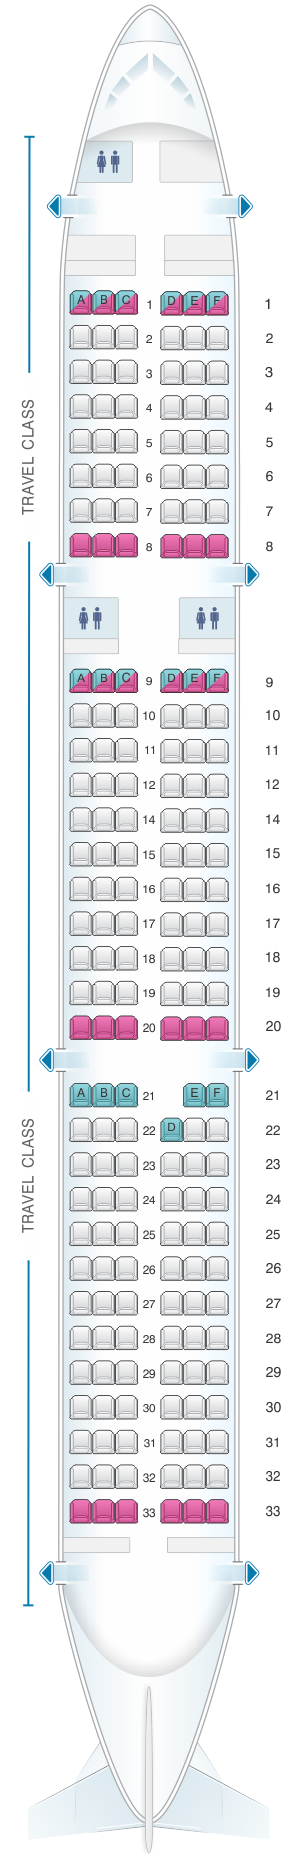 Seat map for Asiana Airlines Airbus A321 200 191PAX